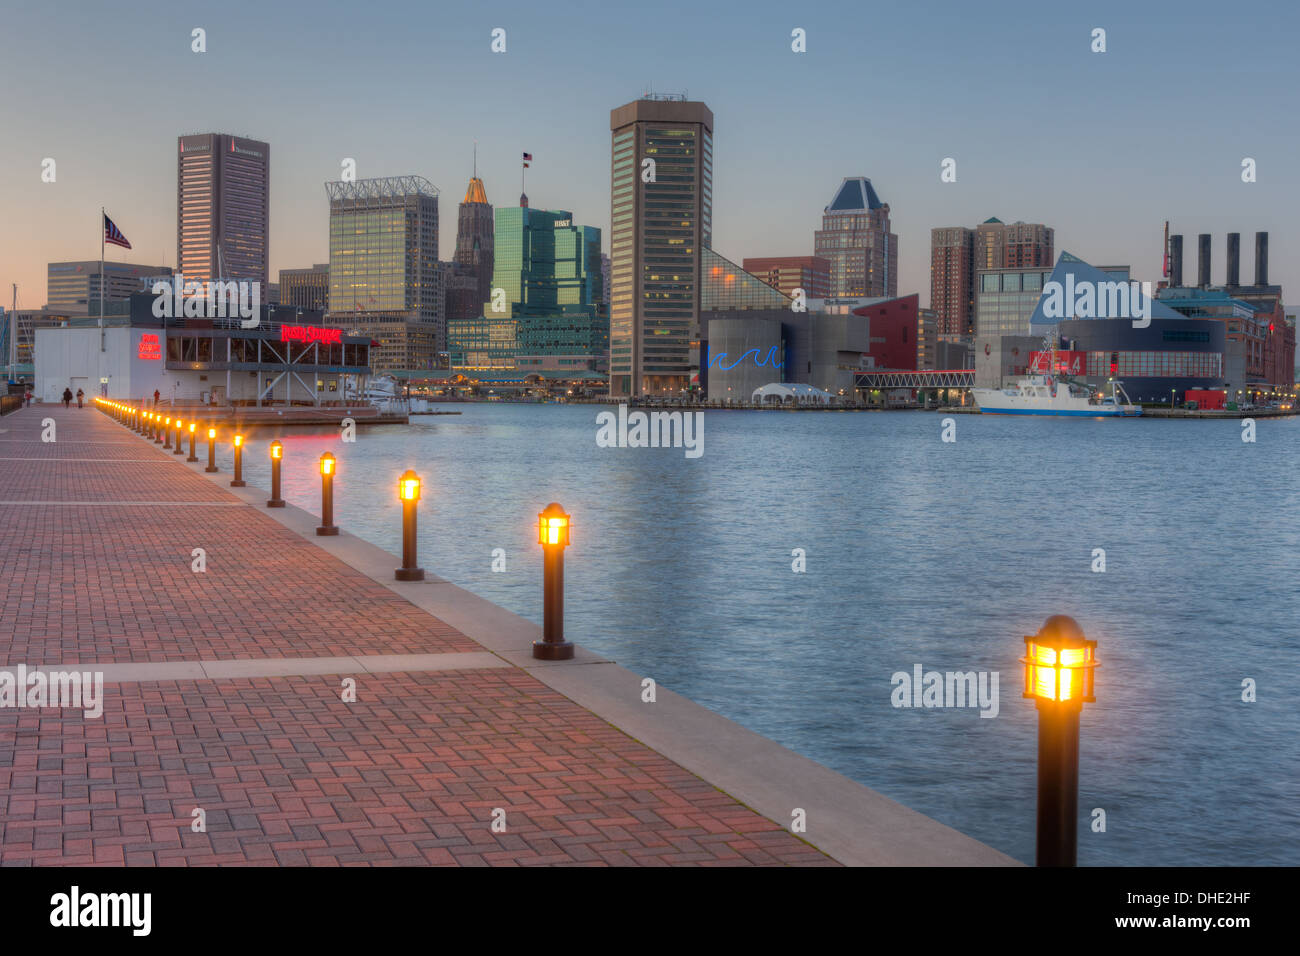 The sky begins to darken over the skyline of Baltimore, Maryland as sunset approaches. Stock Photo